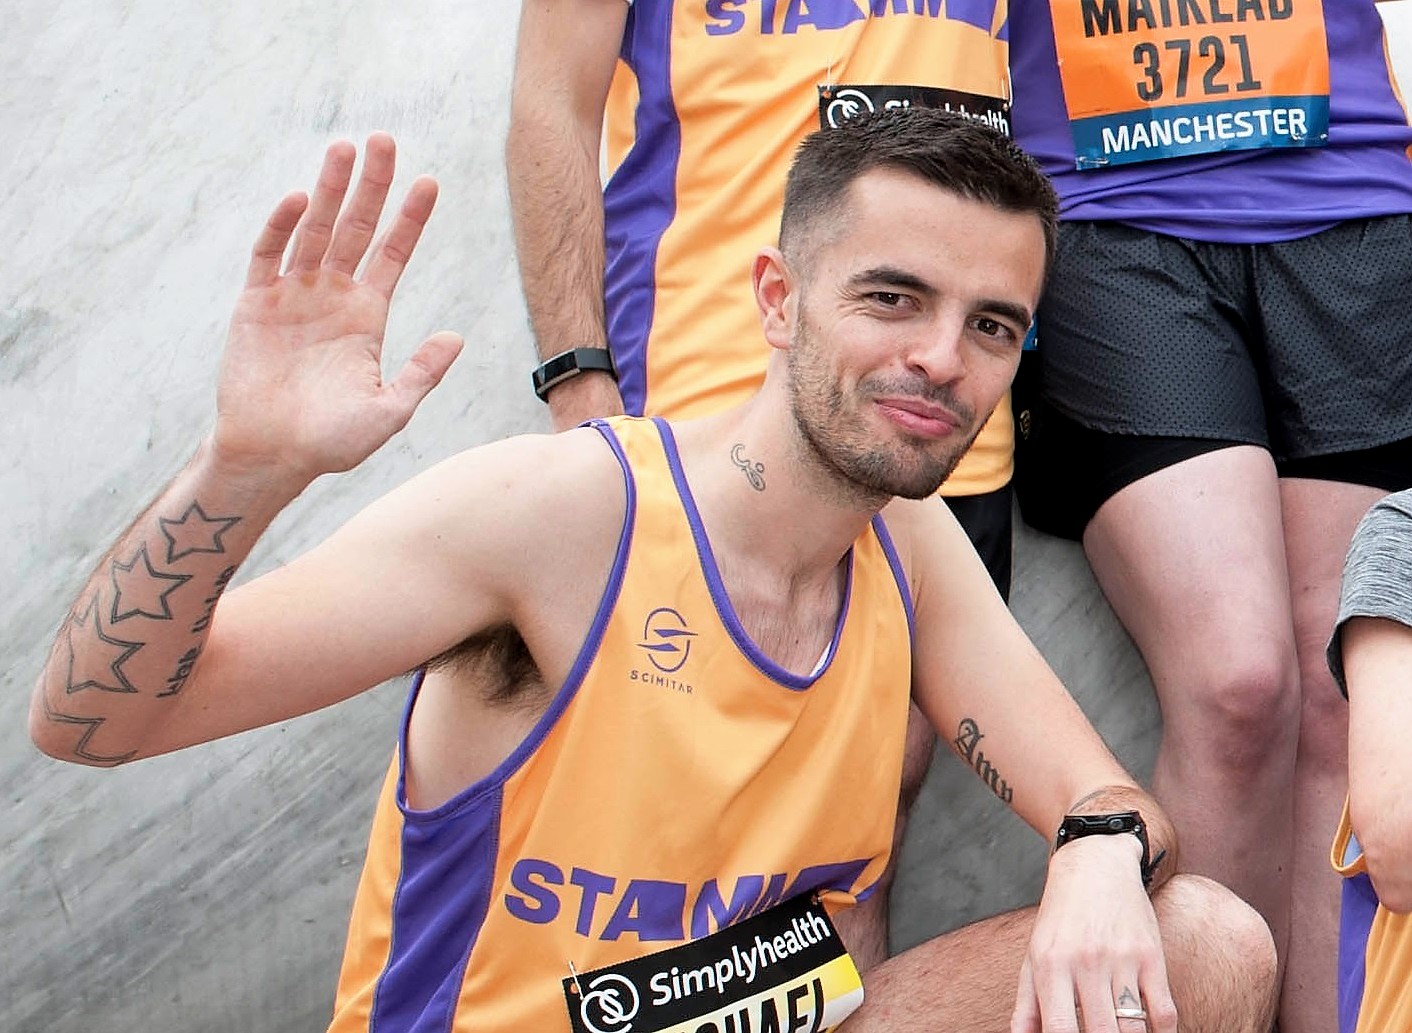 A man in a running vest looking at the camera and waving